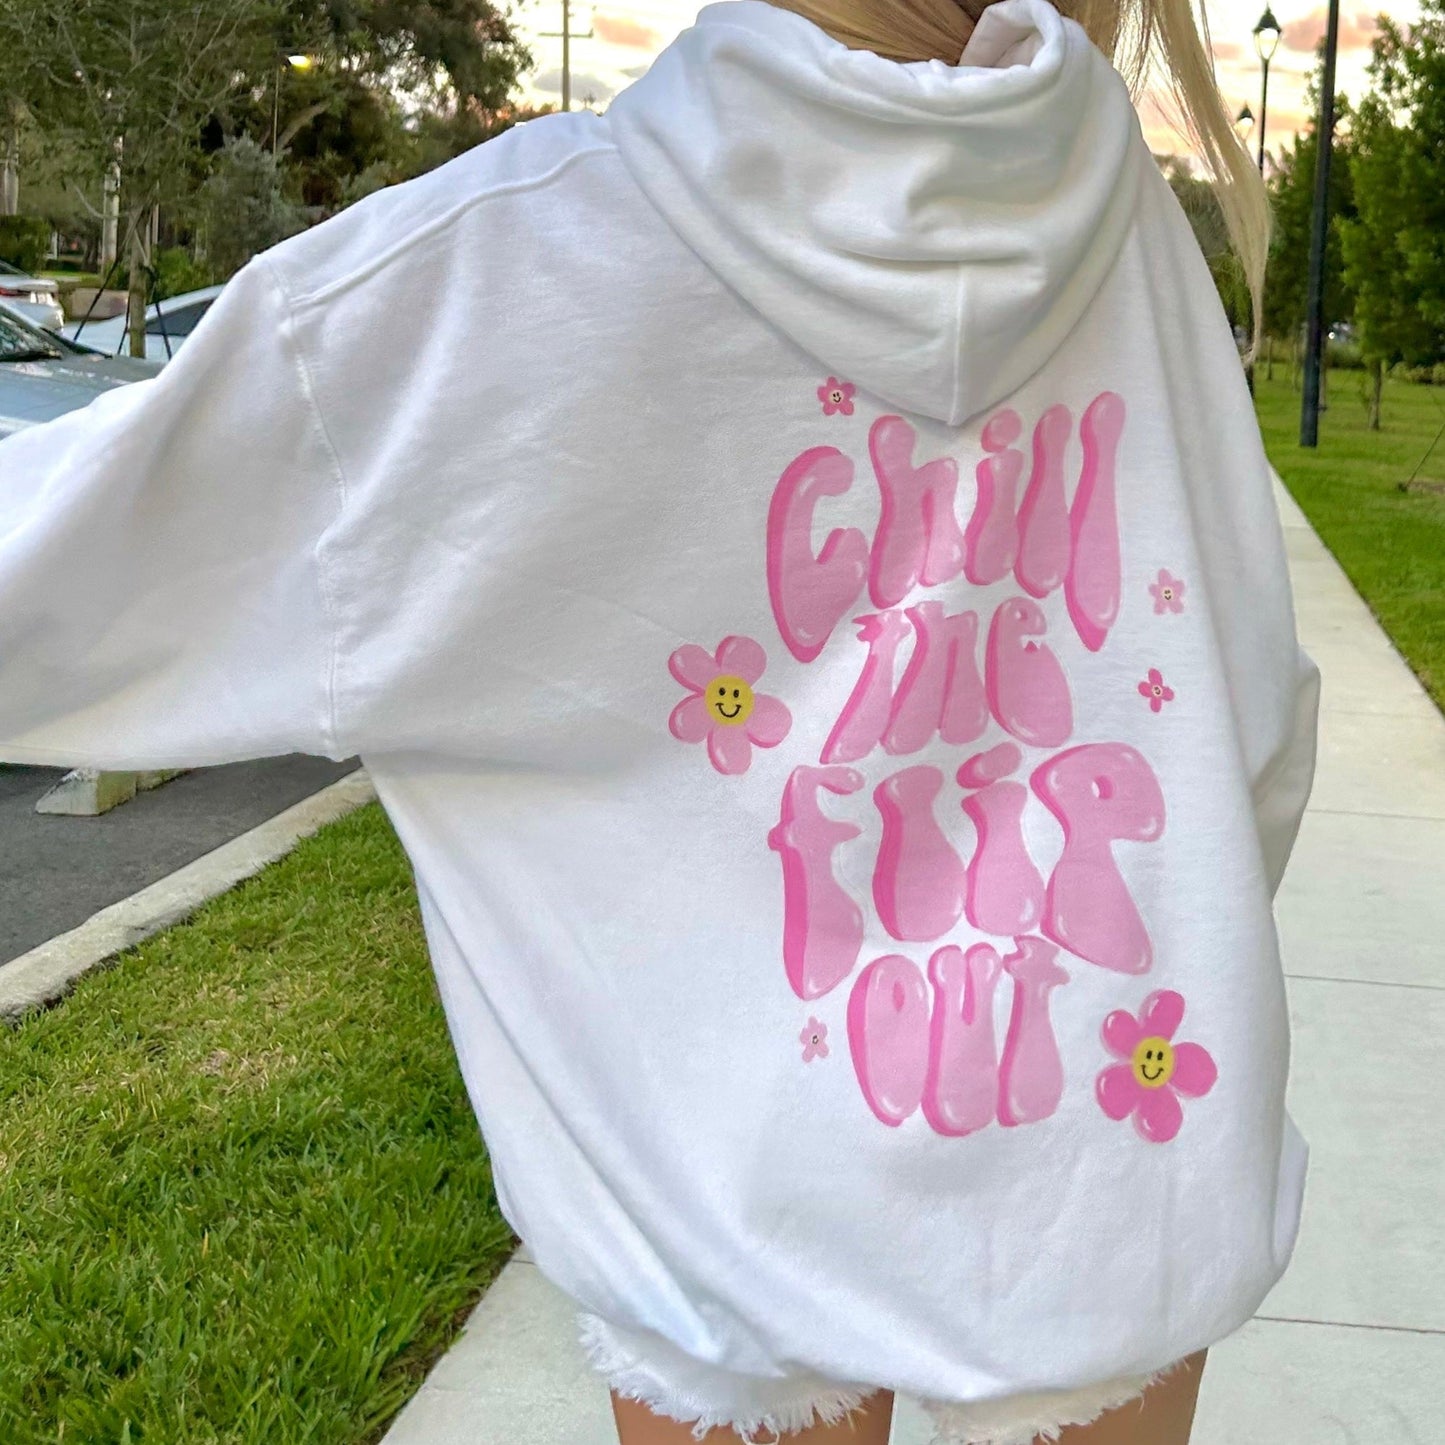 Chill Out Hoodie - BRYKNOLO LLC Hoodie